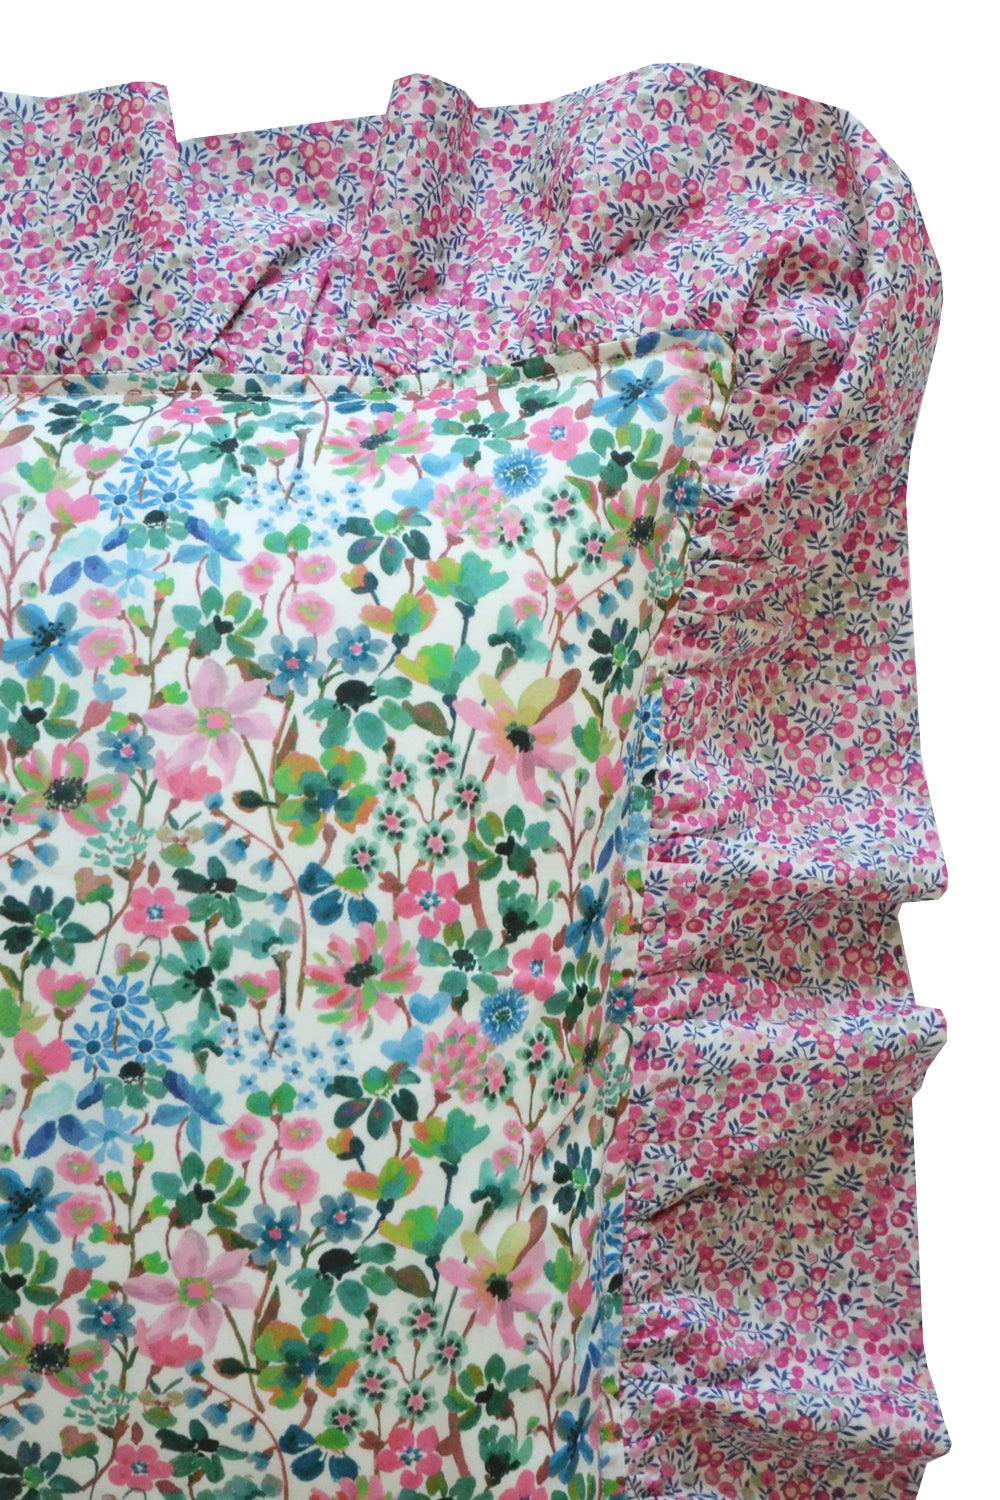 Ruffle Cushion made with Liberty Fabric DREAMS OF SUMMER - Coco & Wolf